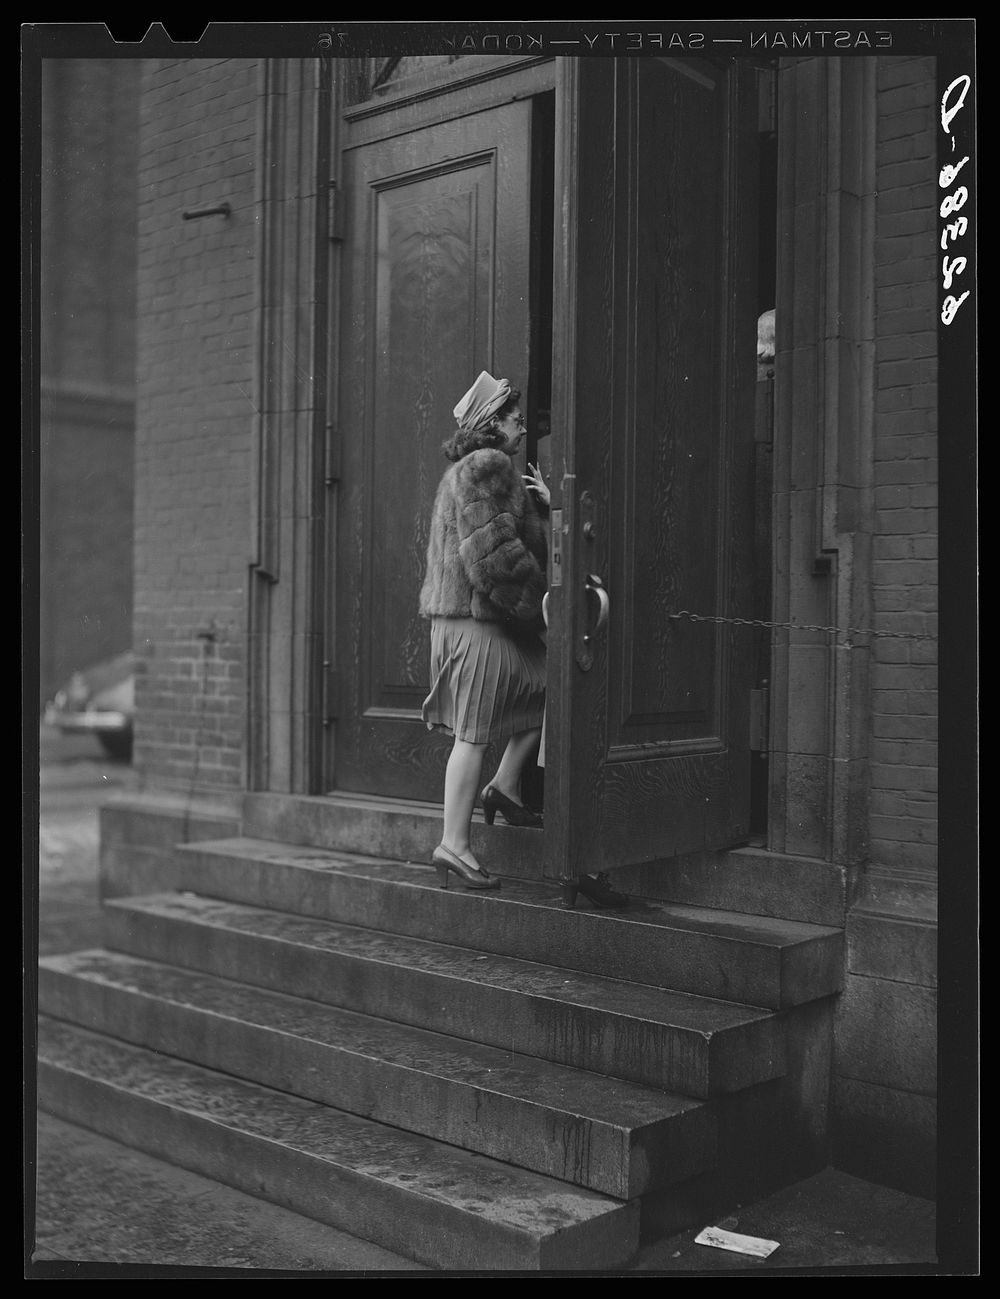 [Untitled photo, possibly related to: Going to mass. Pittsburgh, Pennsylvania]. Sourced from the Library of Congress.